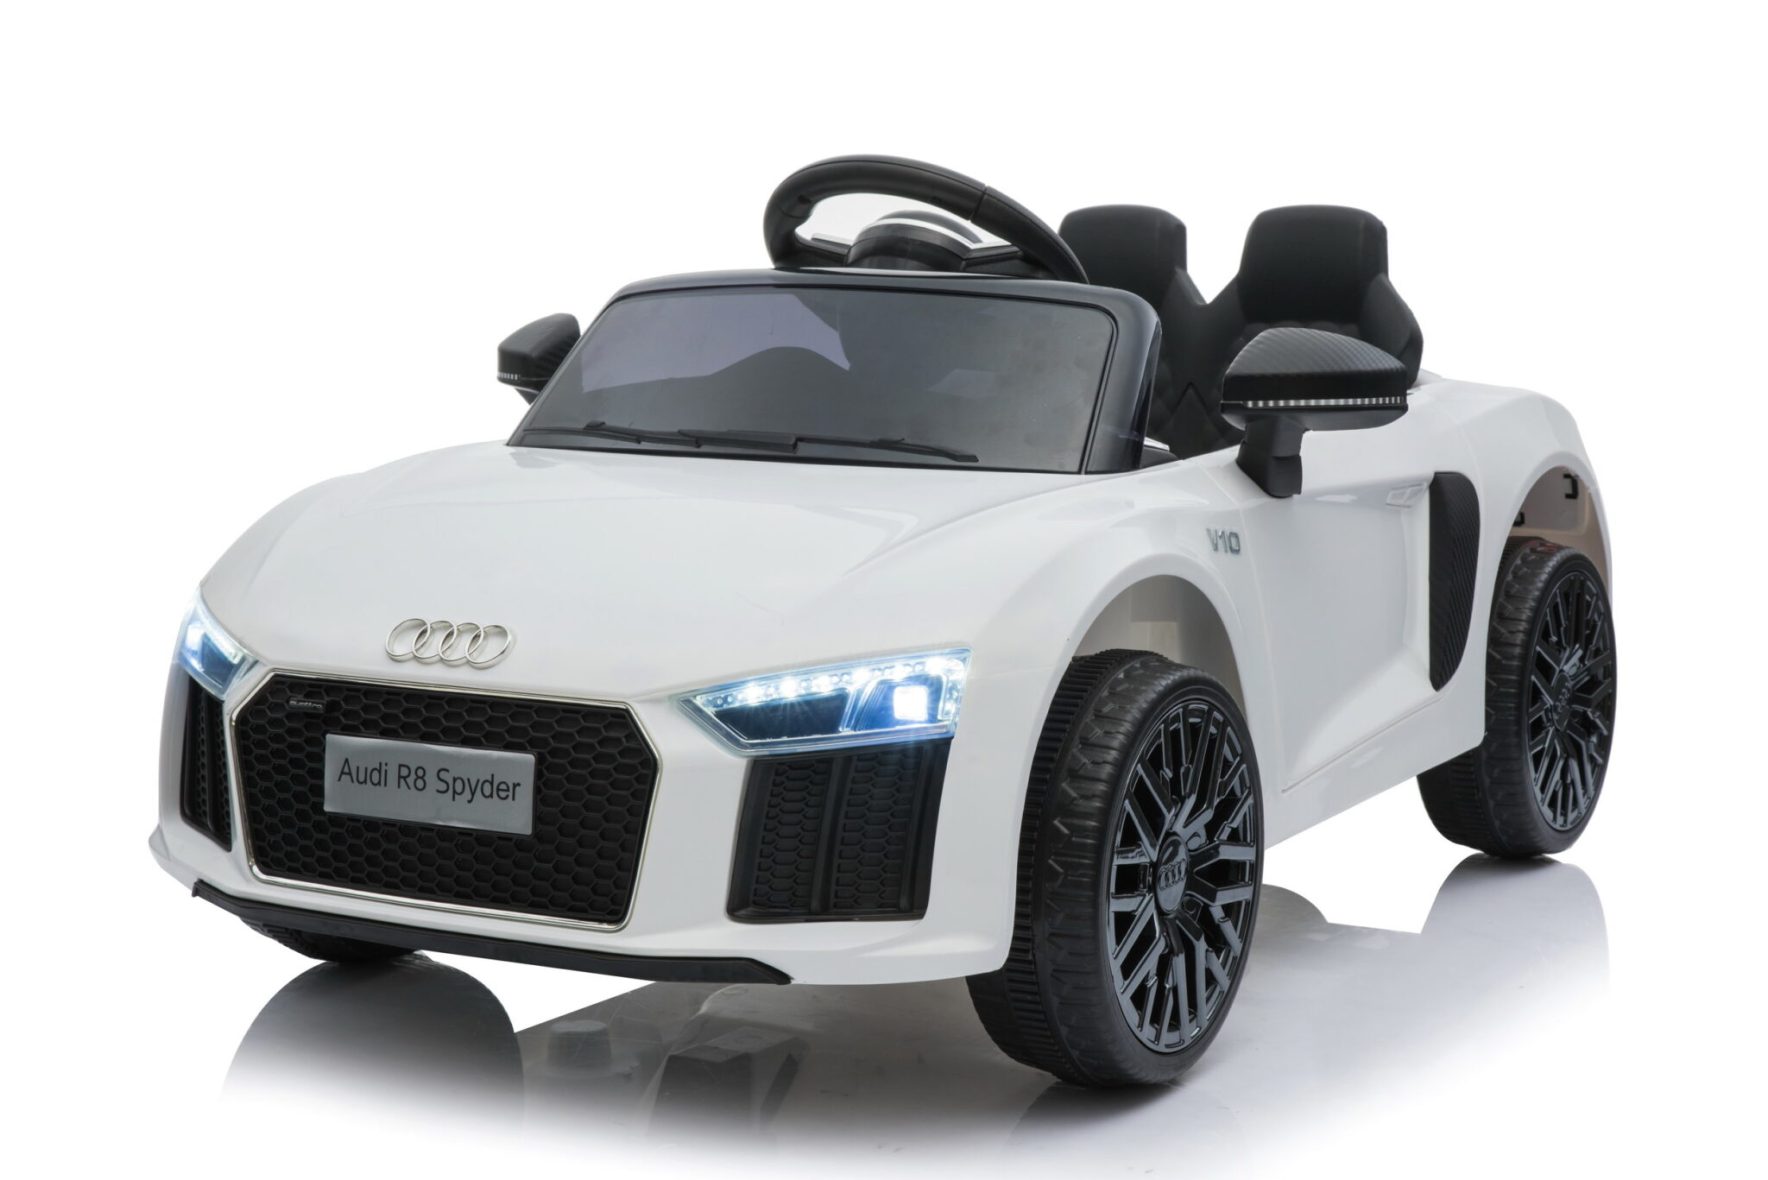 Children’s Car Audi R8 12 Volt White with Remote Control and Soft Start